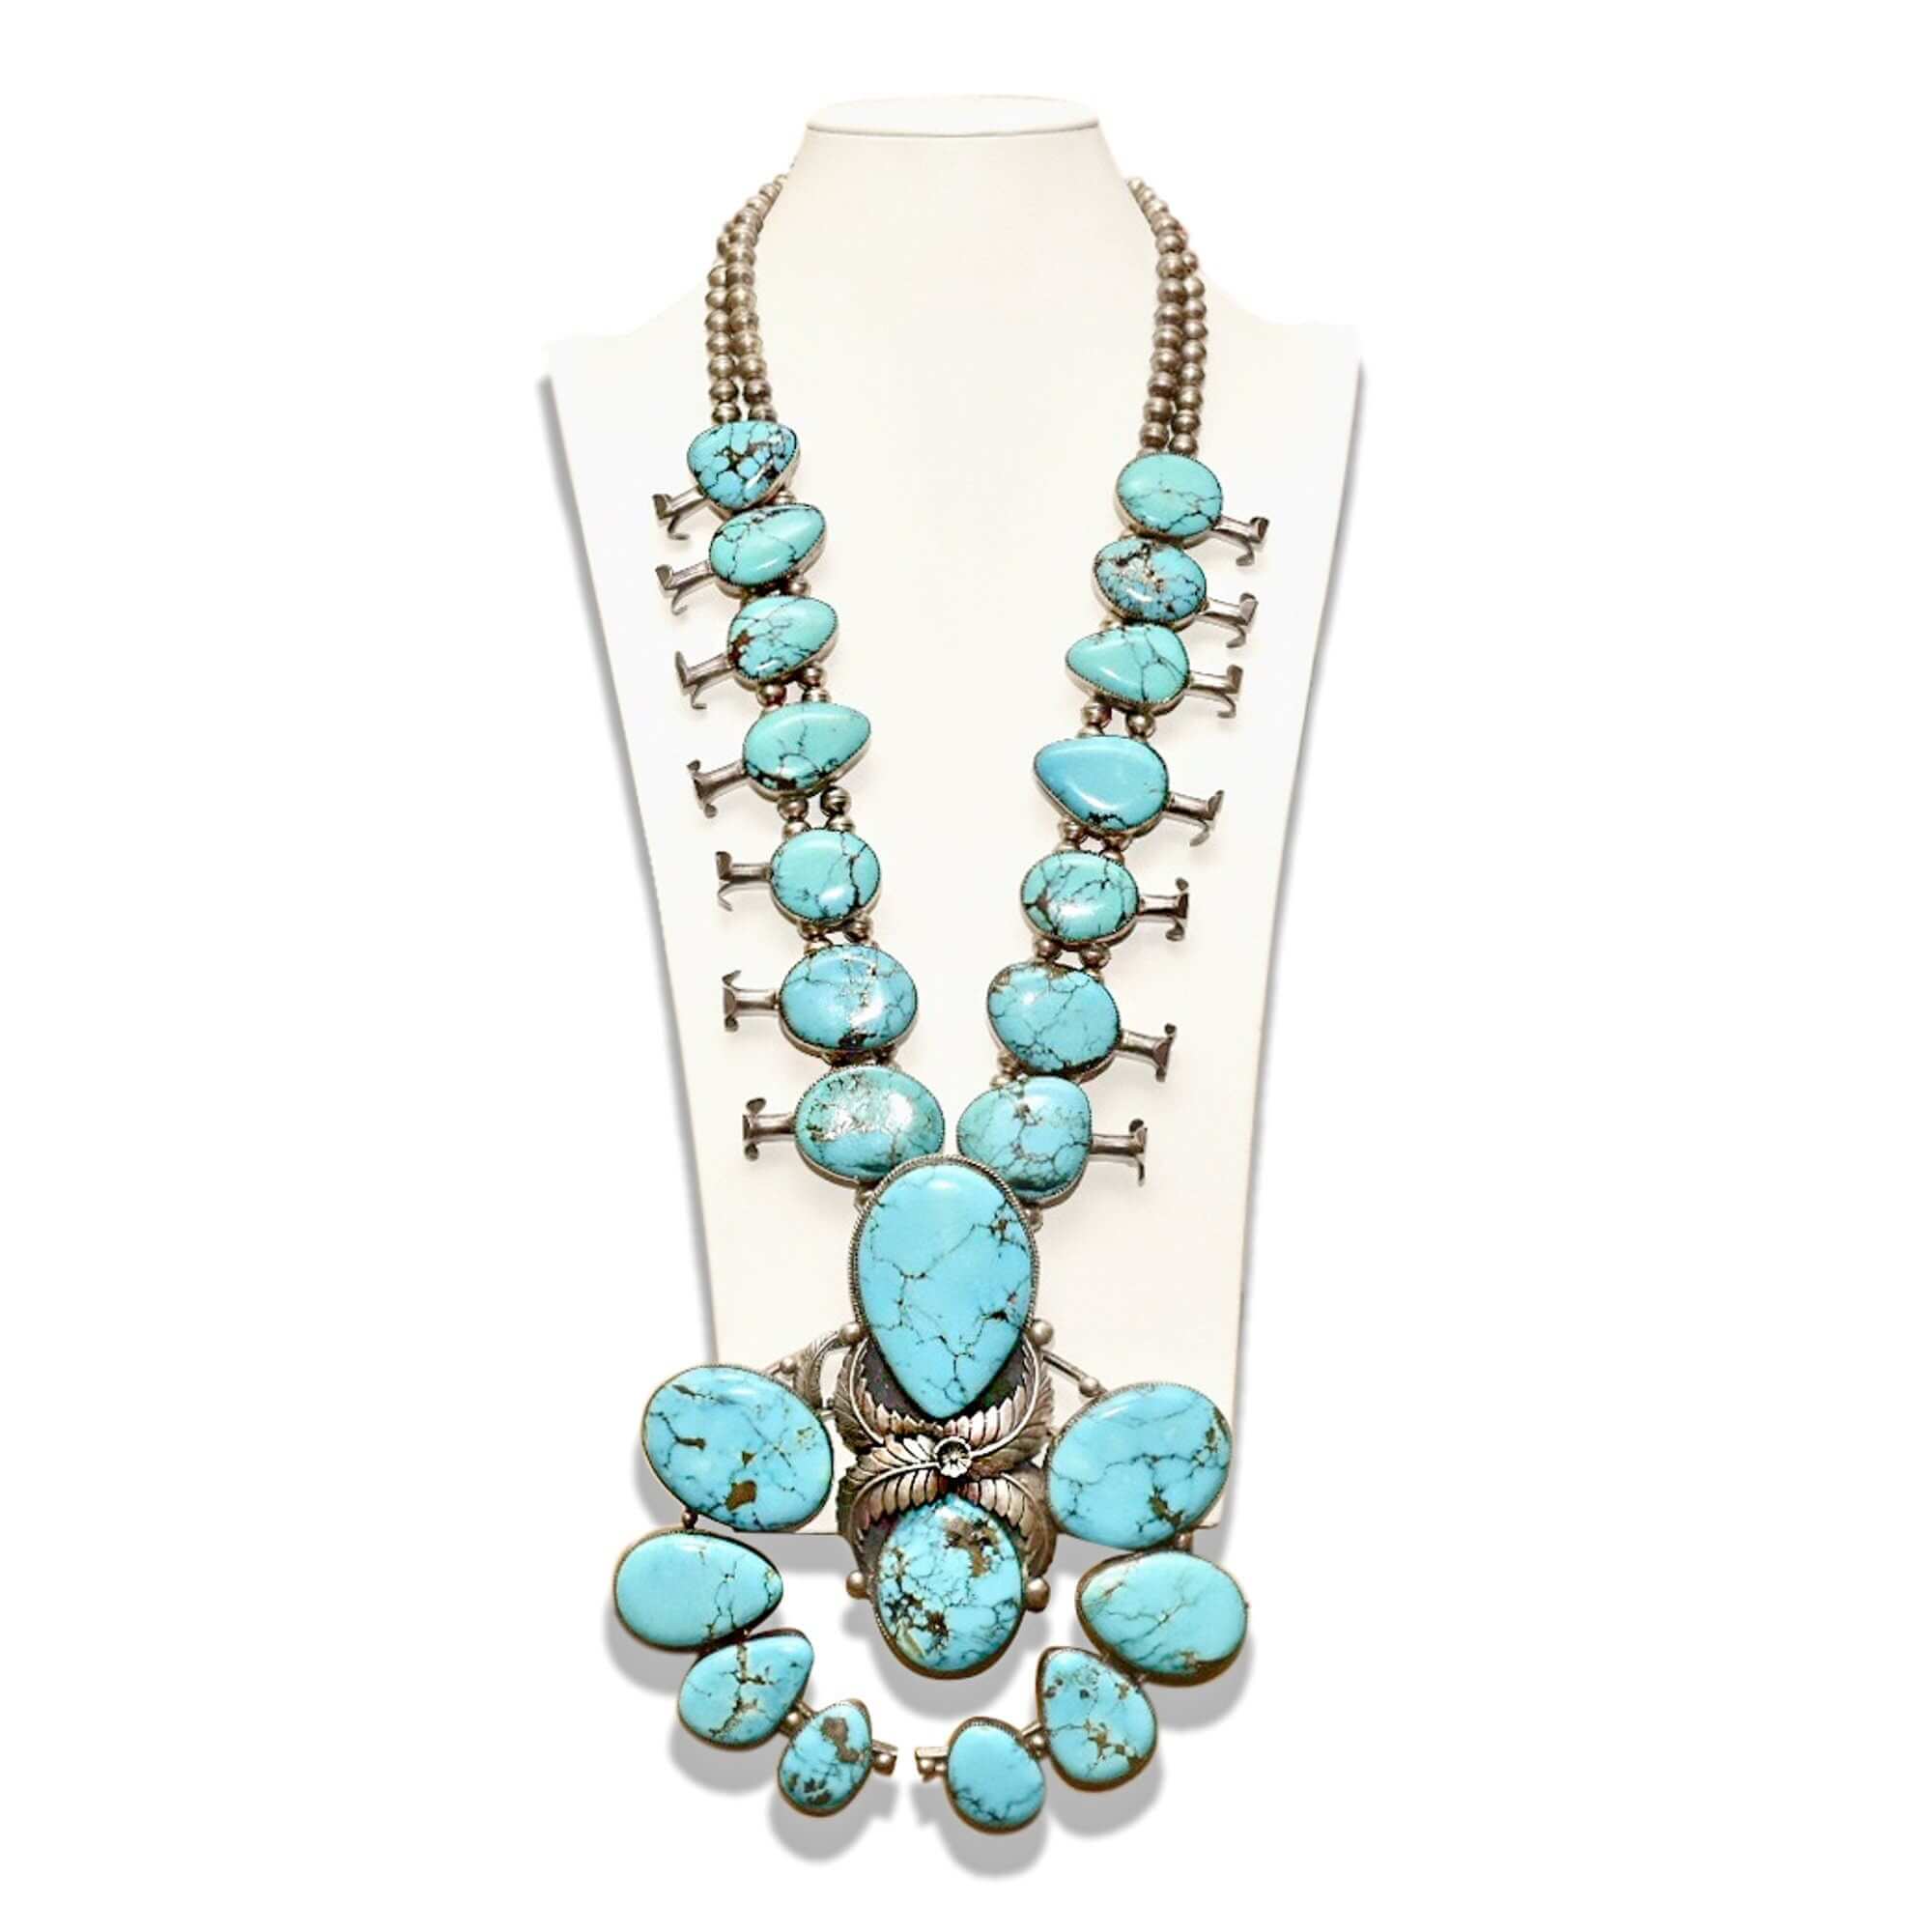 Vintage Gold and Turquoise Squash Blossom Necklace - Ruby Lane